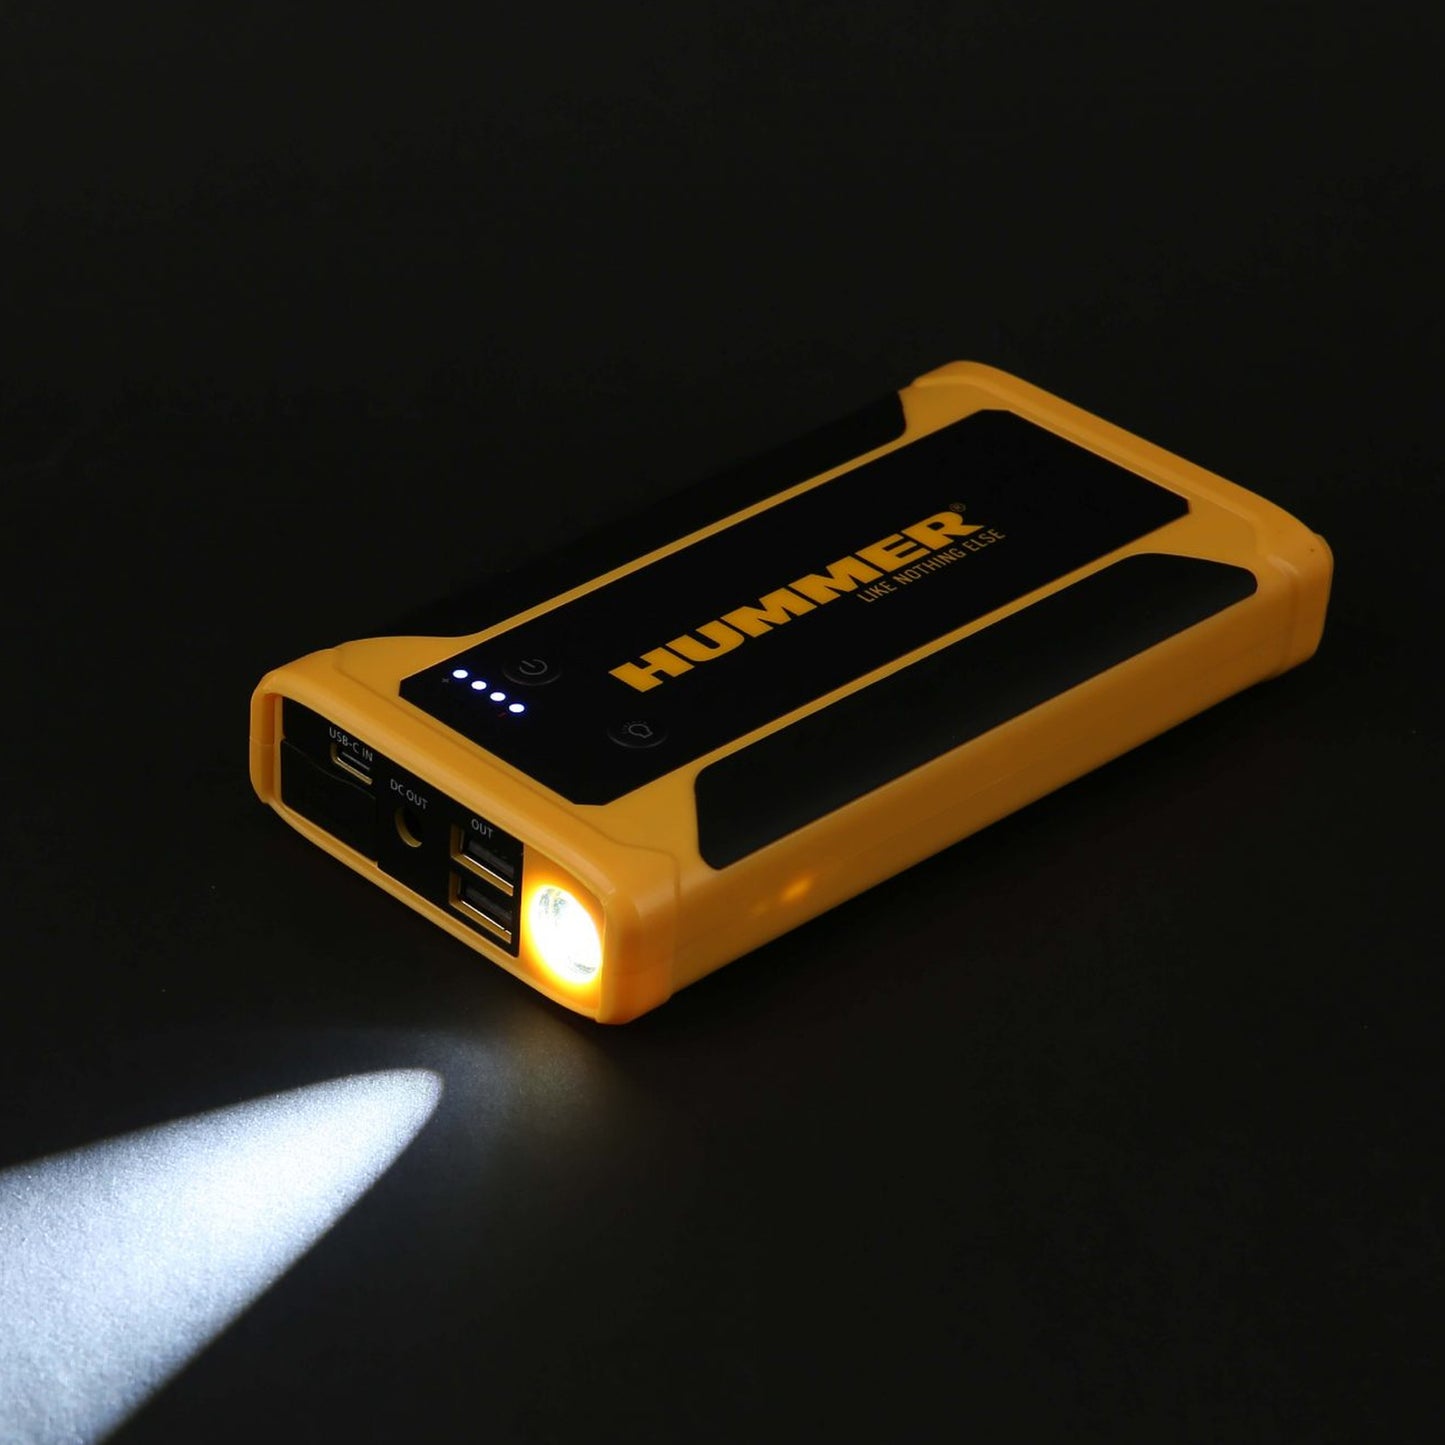 Hummer HX Multifunctional Powerbank Jump Starter USB-A to USB-C Wireless Charger with Work Light 10000mAh (Barcode: 4897035892535 )